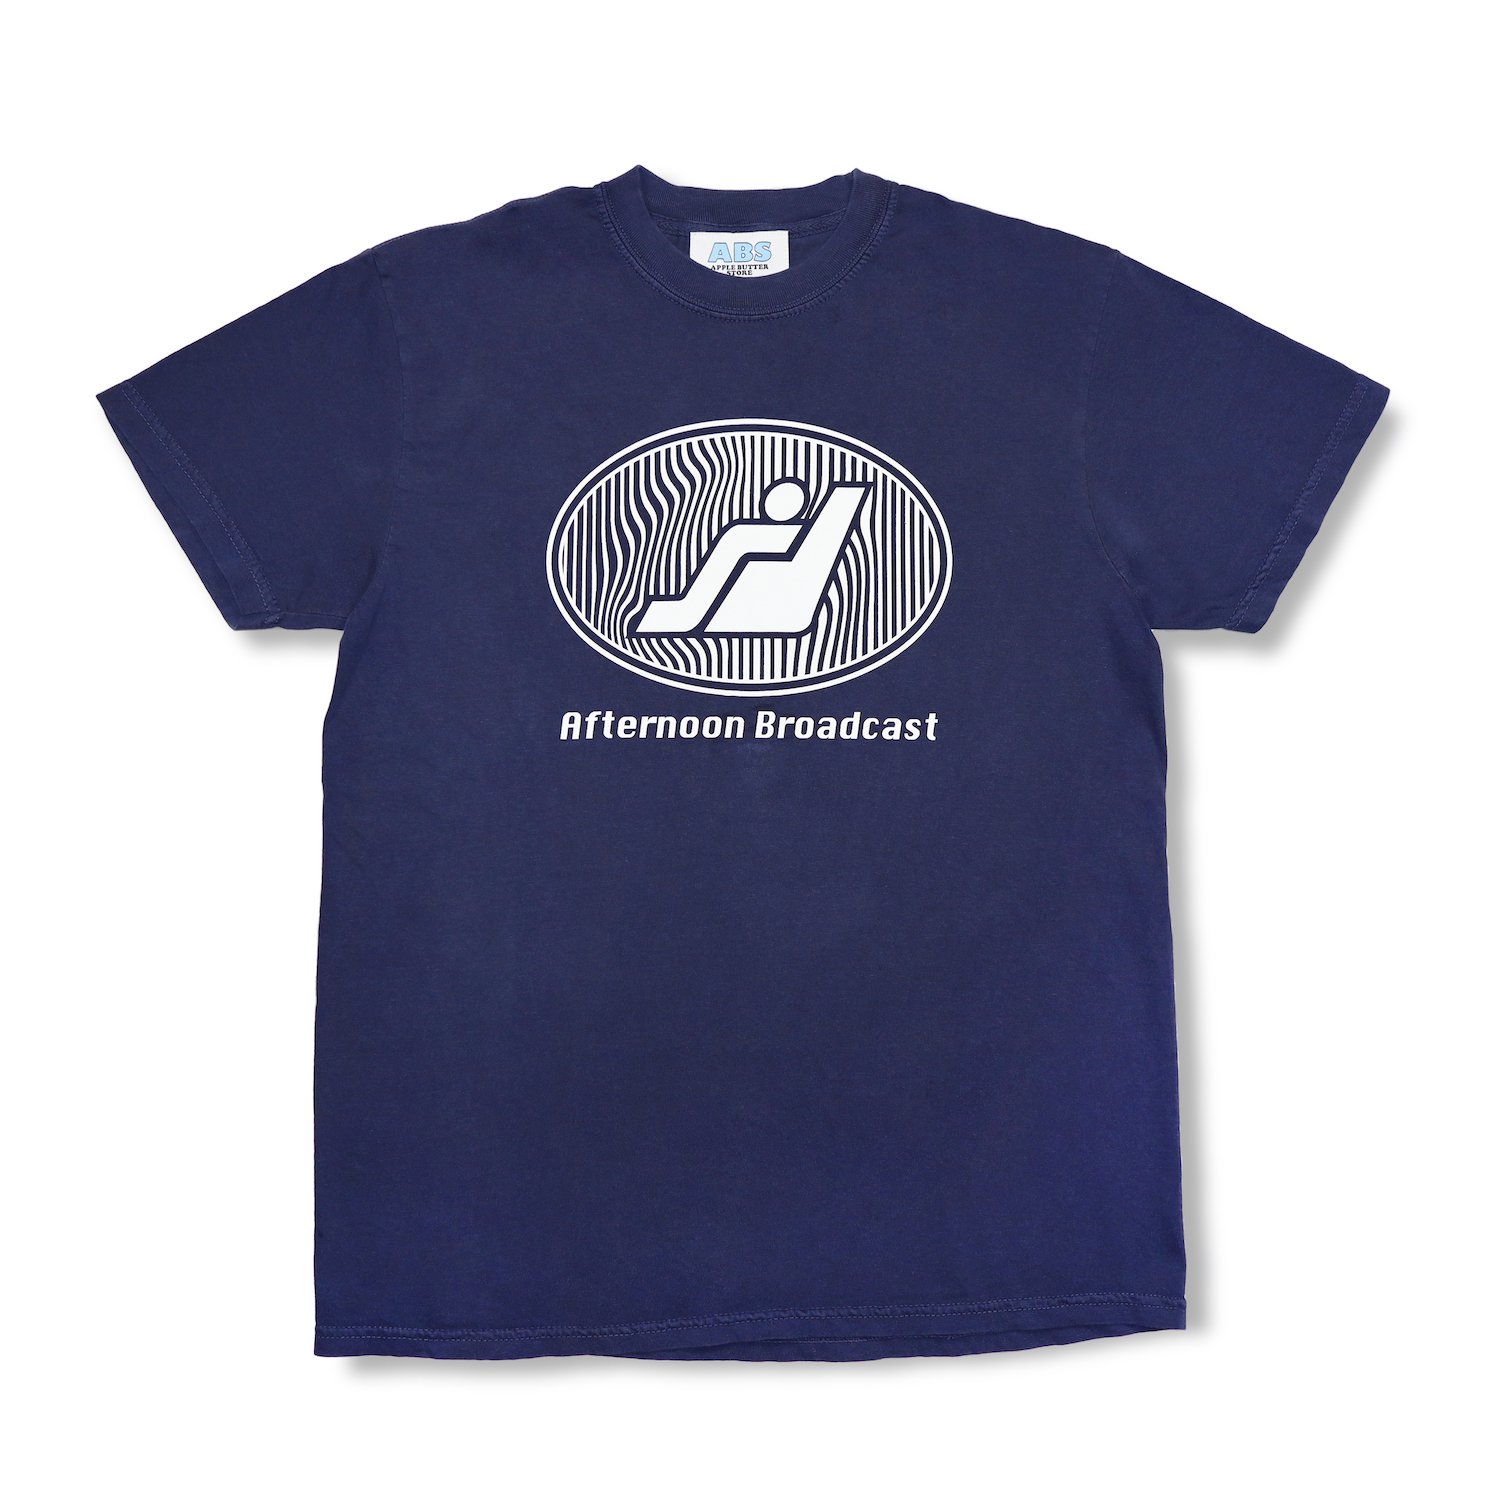 APPLE BUTTER STORE<br>Afternoon Broad Cast Tee<br>